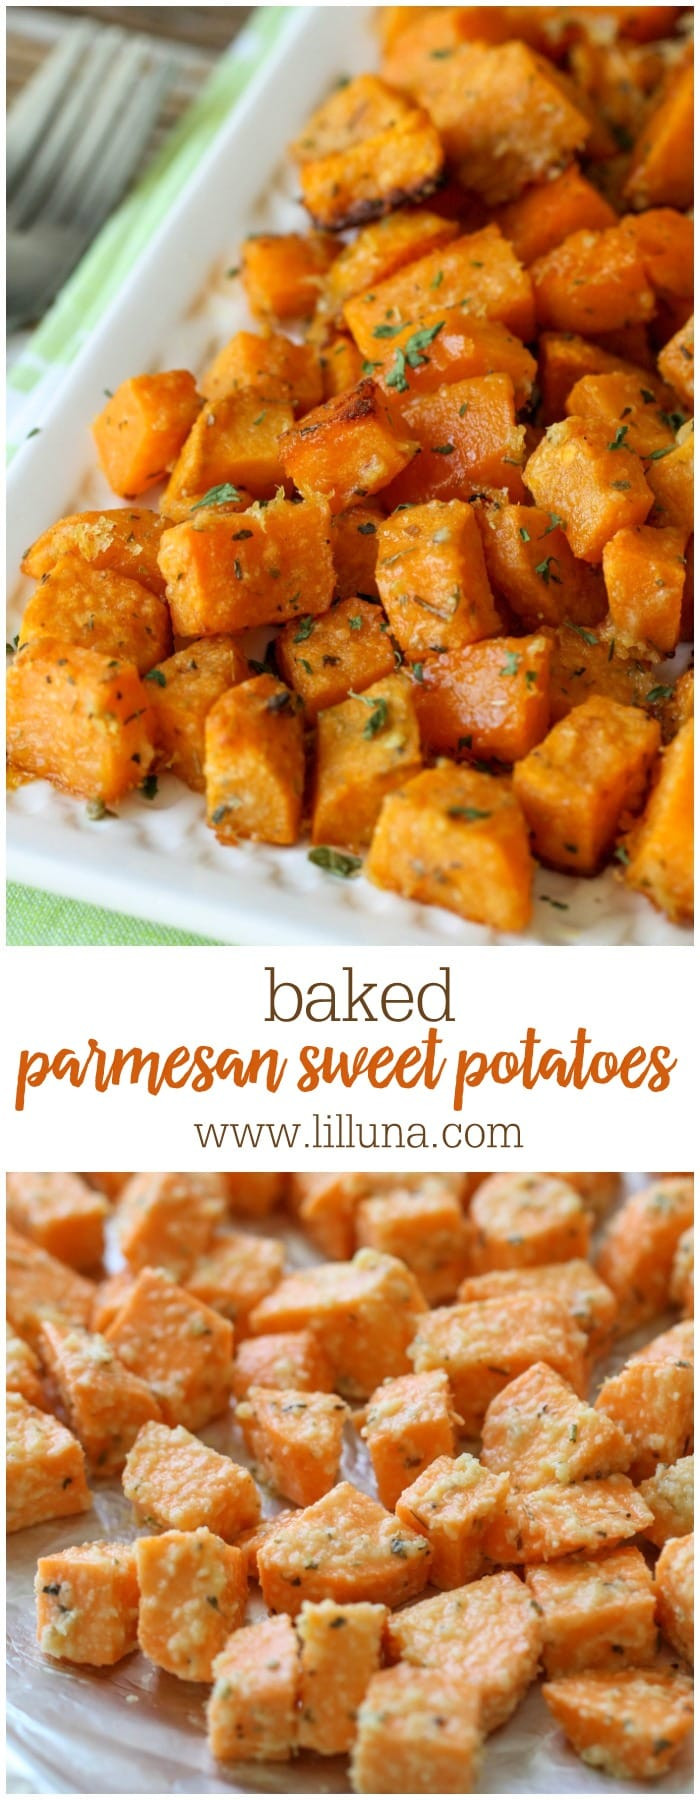 Sweet Potato Recipes Baked
 Oven Roasted Sweet Potato Cubes Just 5 Minute Prep Time